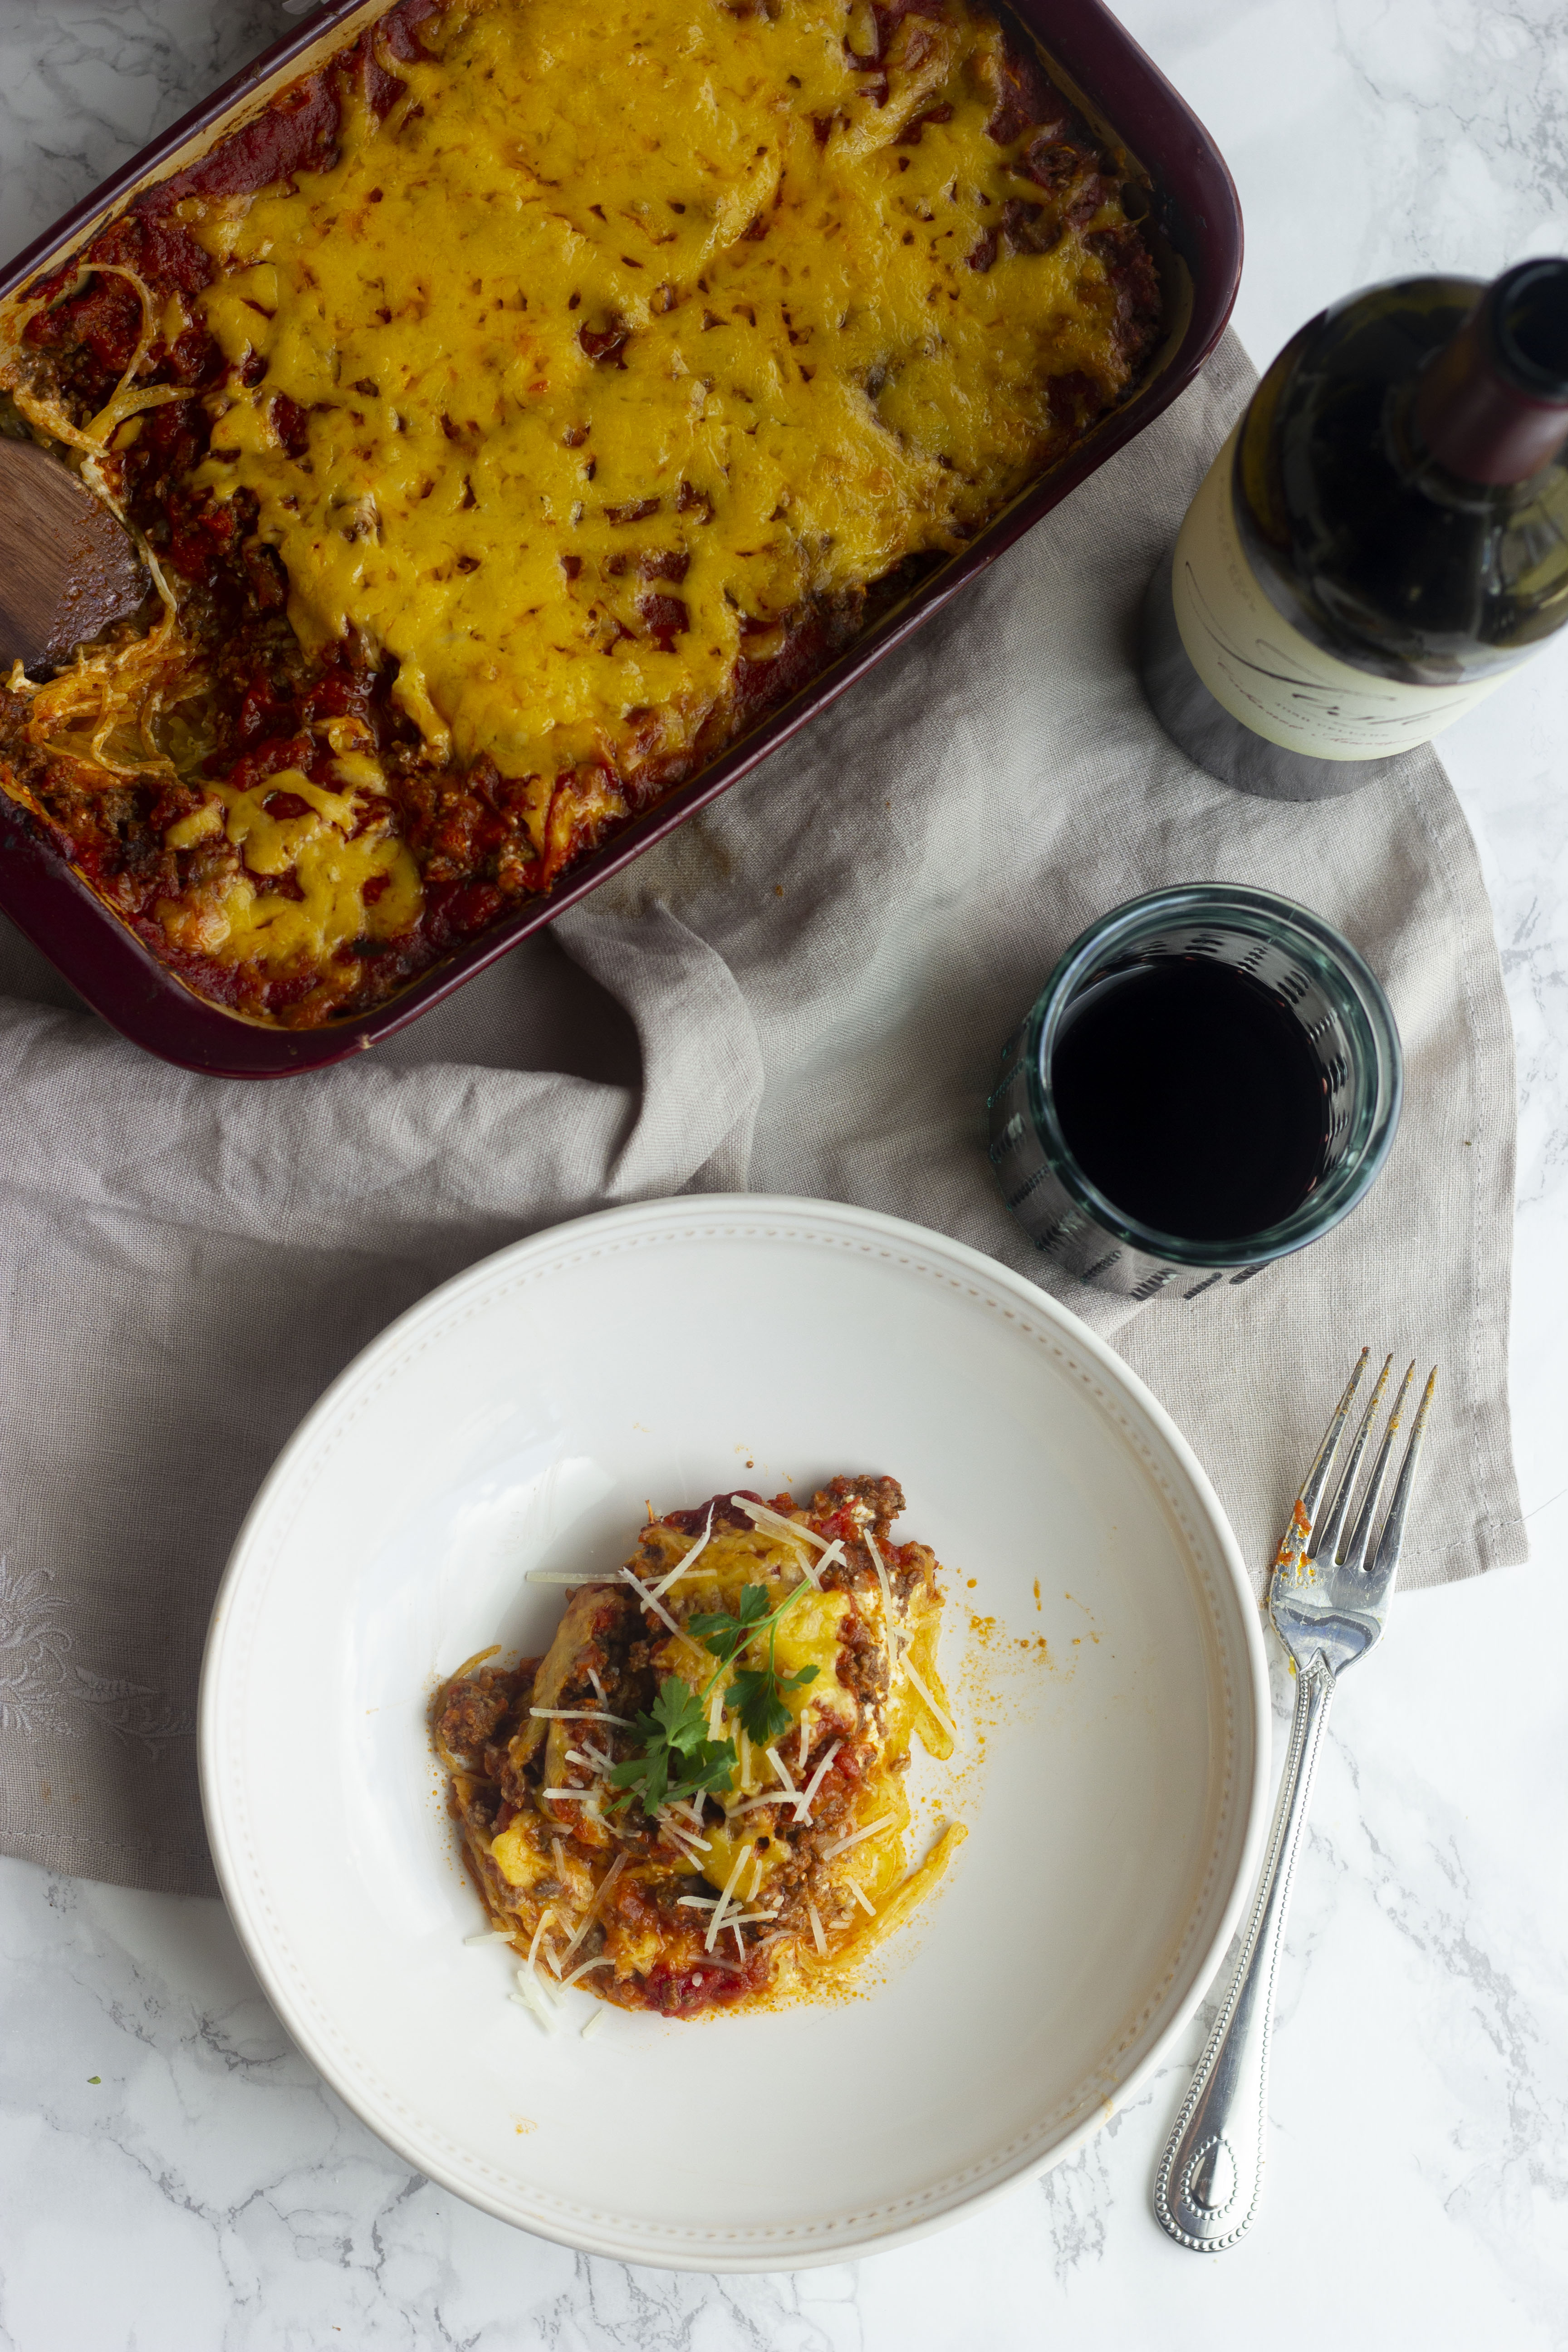 This low carb spaghetti bake will curb all your spaghetti cravings. At just 7 net carbs per serving, this meaty, cheesy, warm keto spaghetti will be a new family favorite!